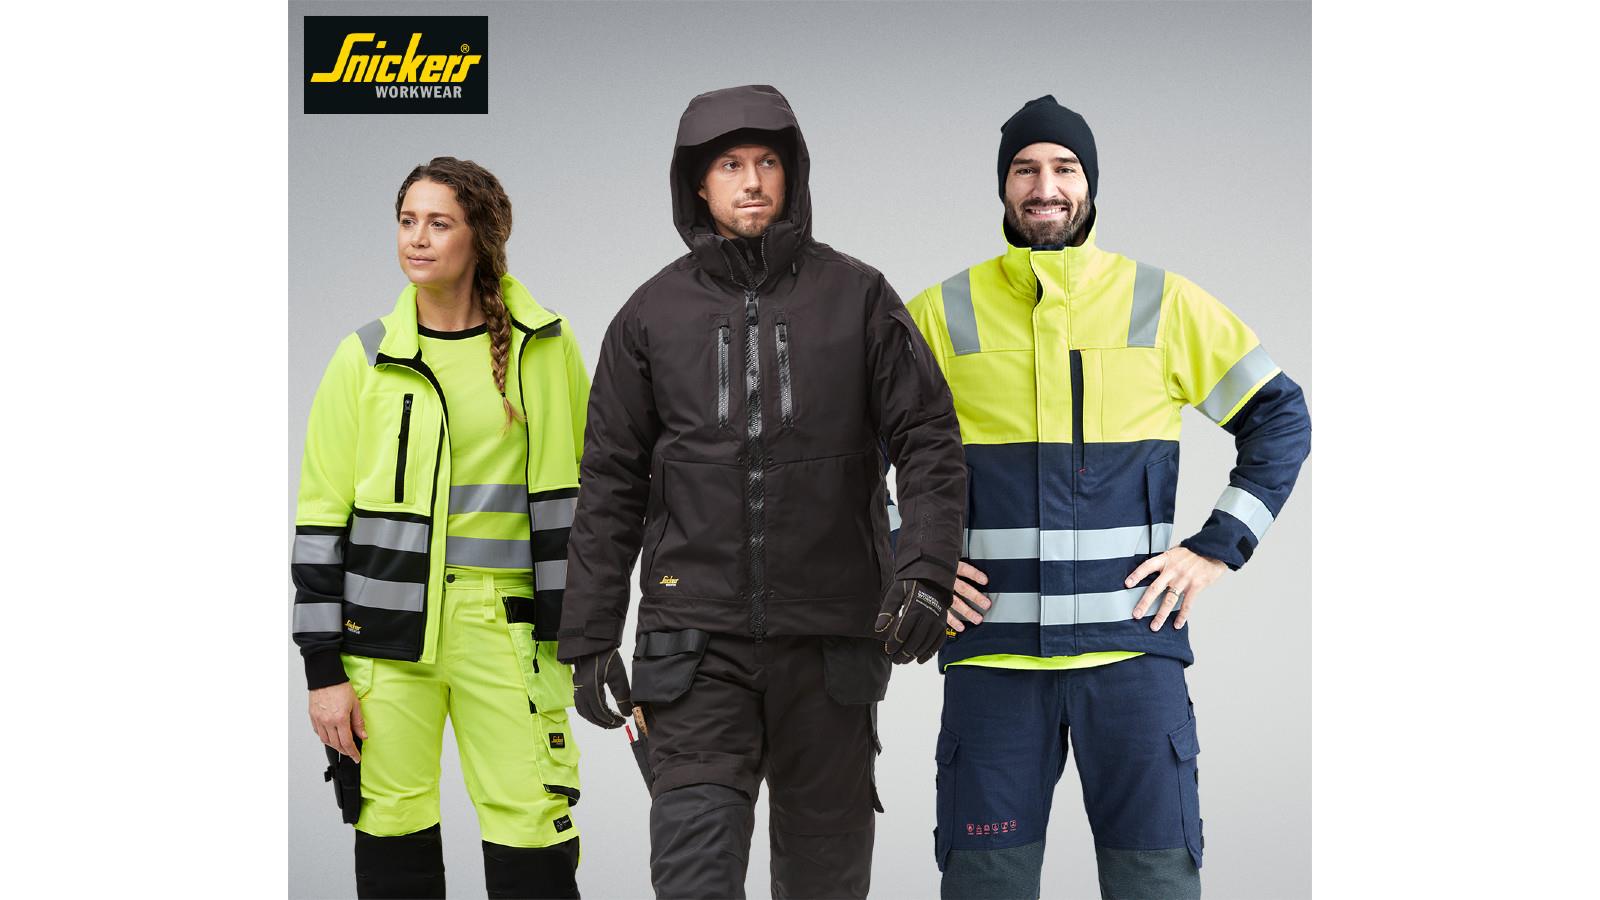 The Snickers Workwear Protective Wear Collection image